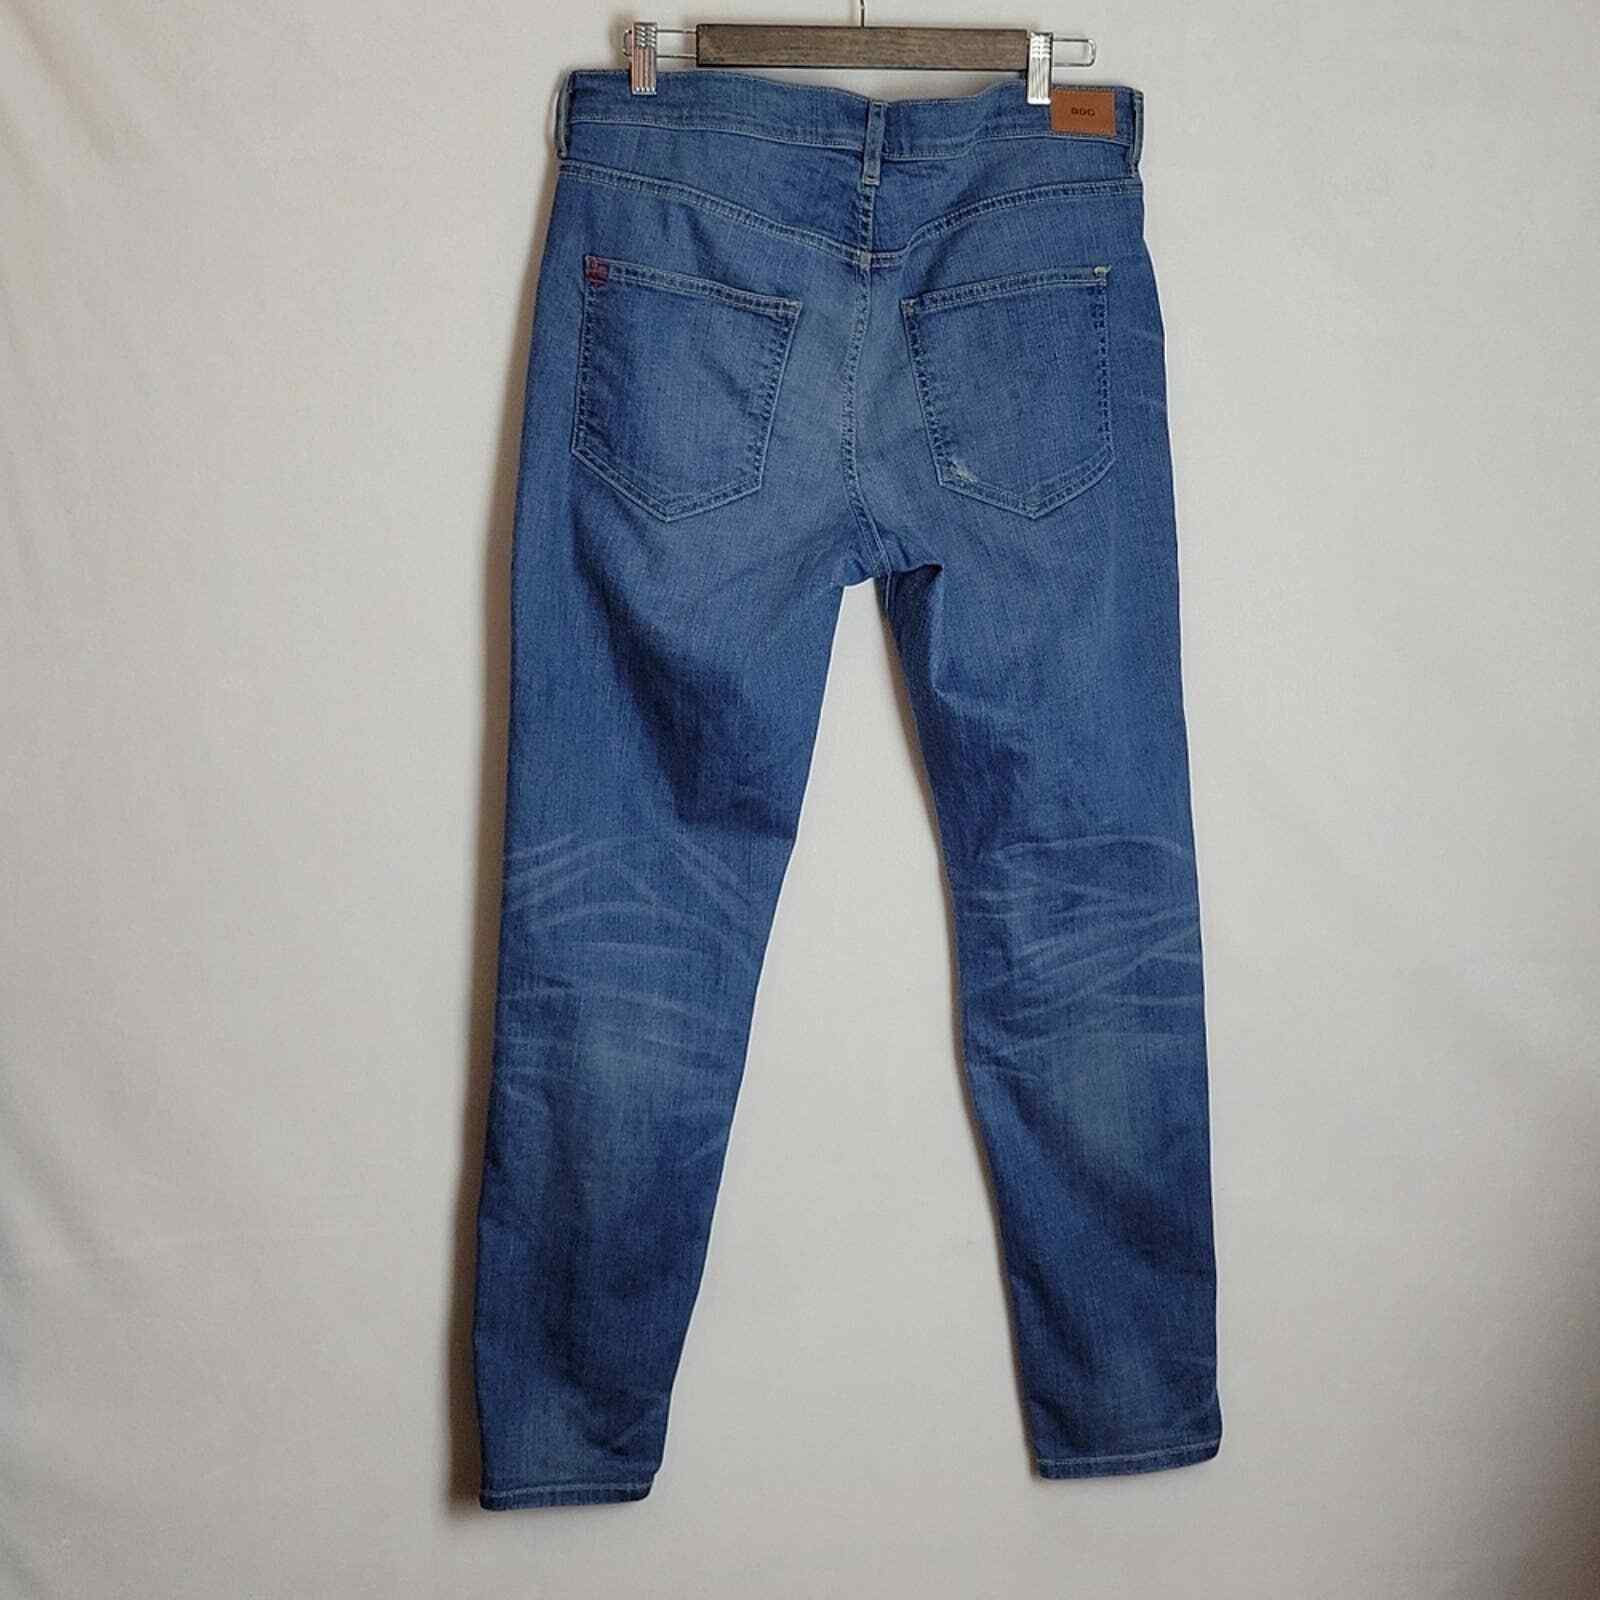 BDG Urban Outfitters Easy Rider Jeans Size 30W 29… - image 4